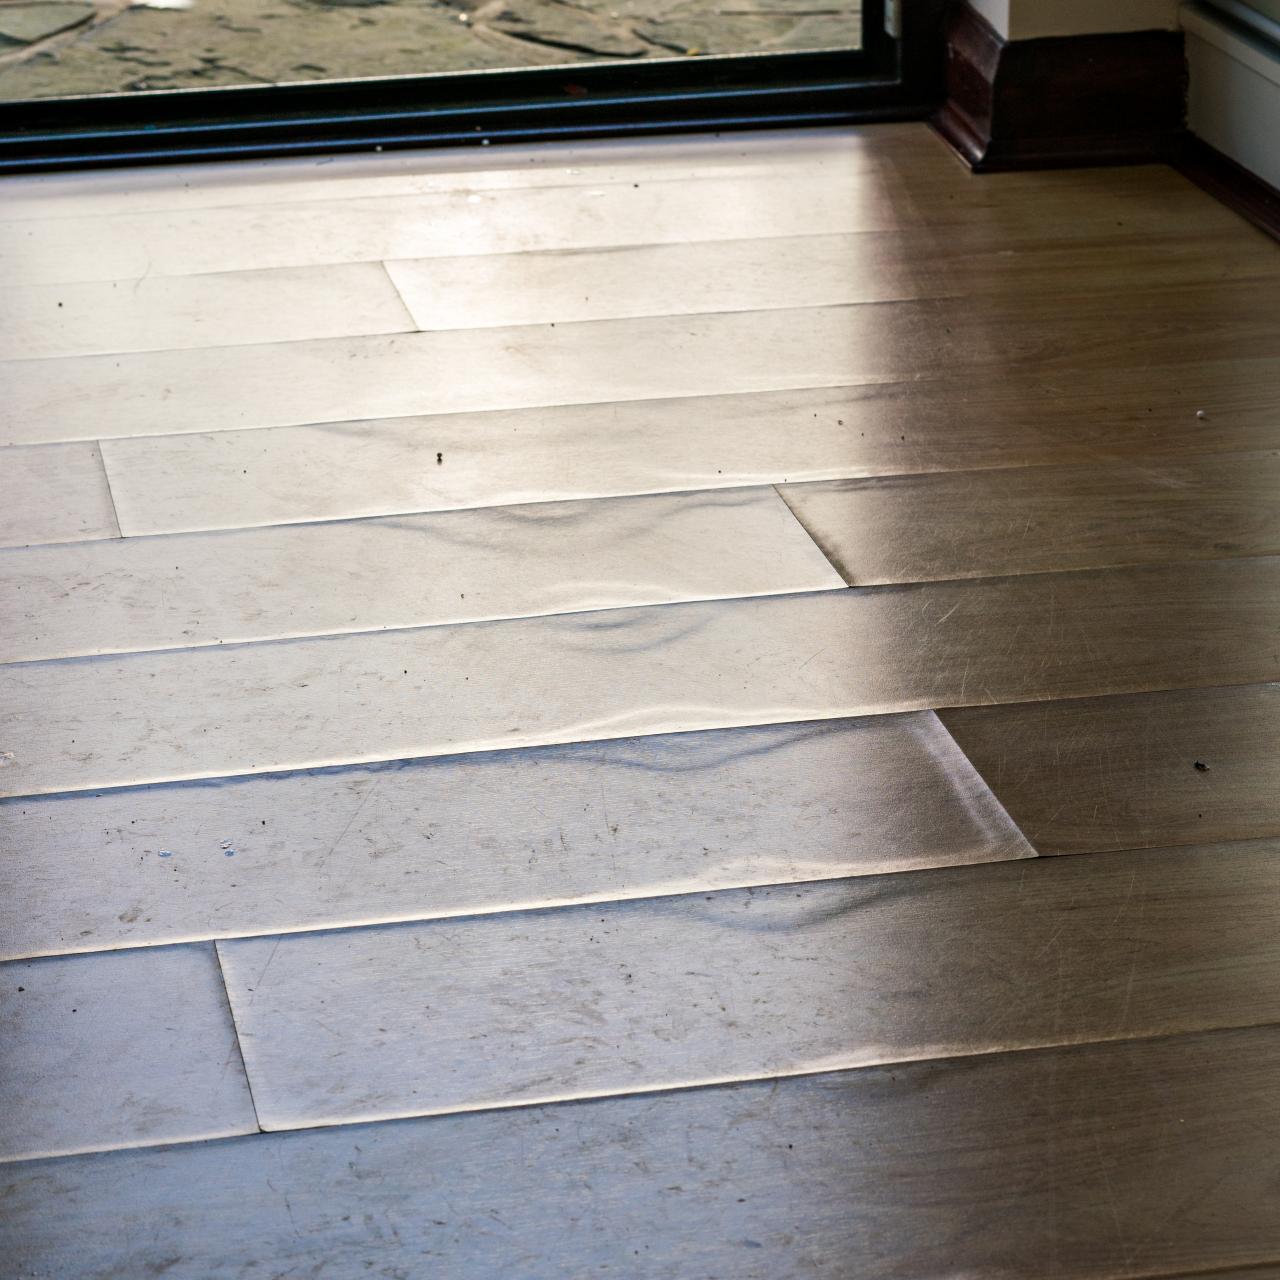 Floor With A Steam Mop, Can You Use A Steam Mop On Hardwood Floors